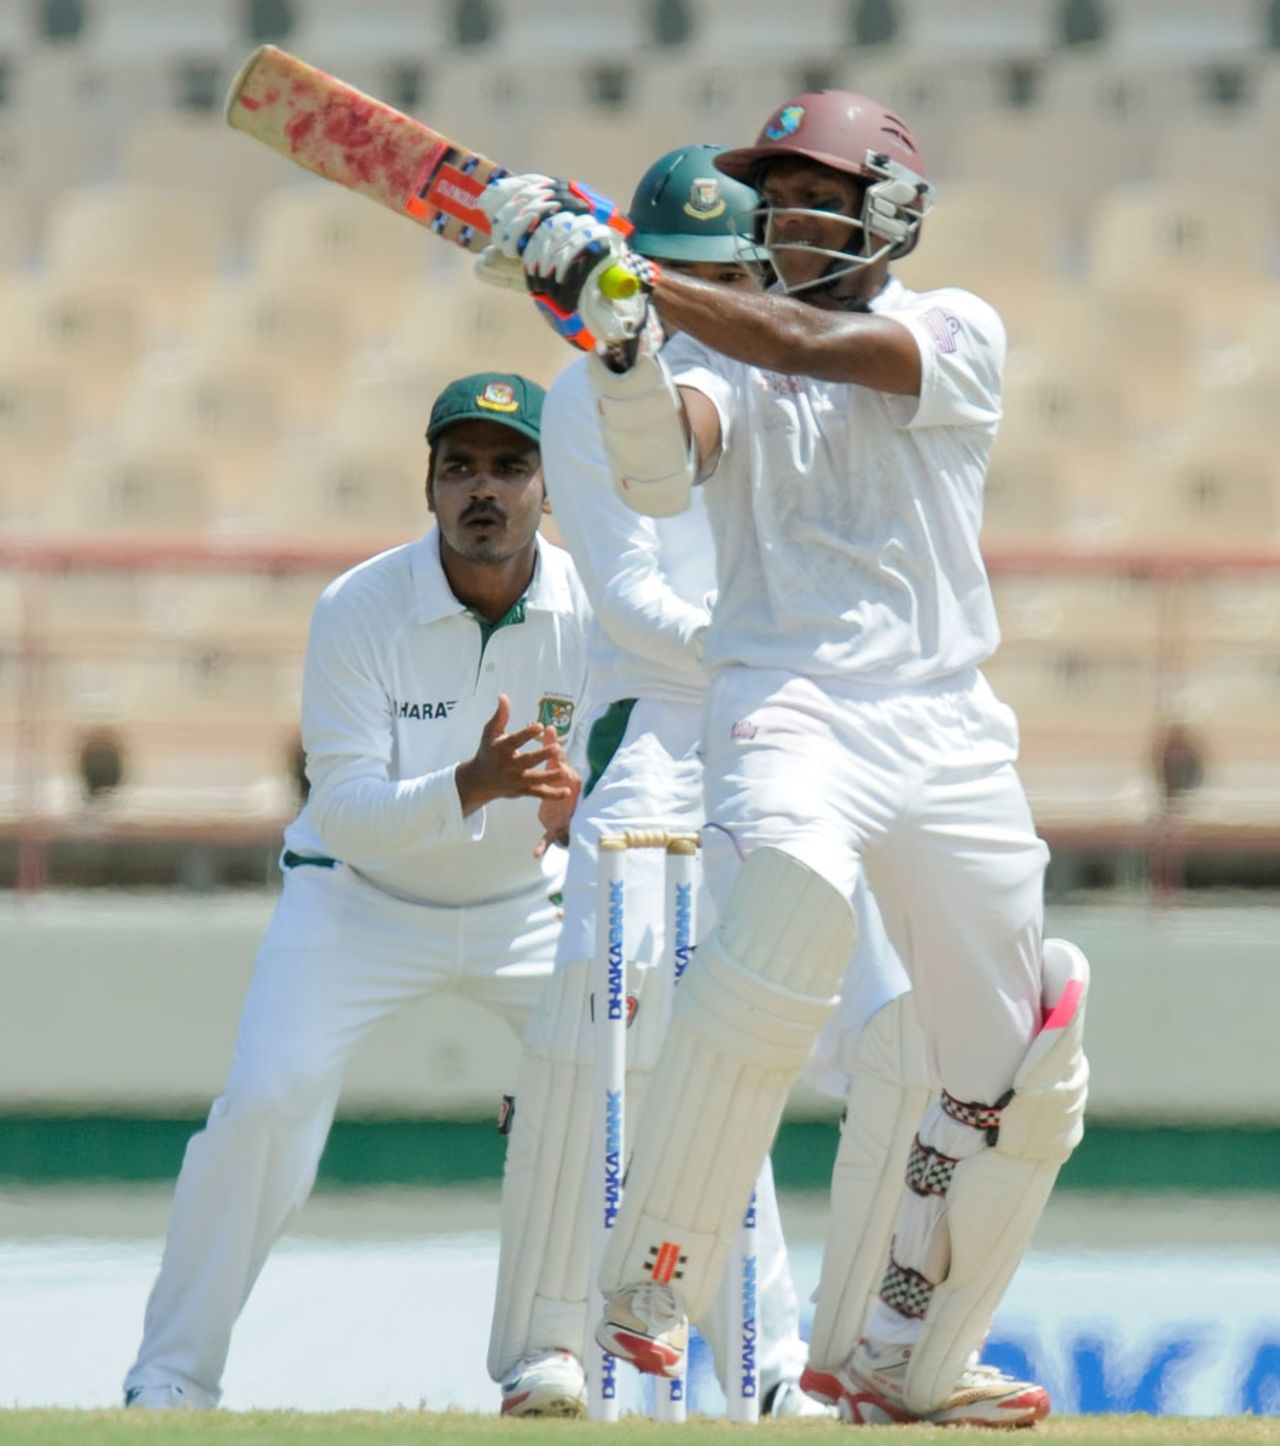 Shivnarine Chanderpaul pulls to square leg, West Indies v Bangladesh, 2nd Test, St. Lucia, 4th day, September 16, 2014